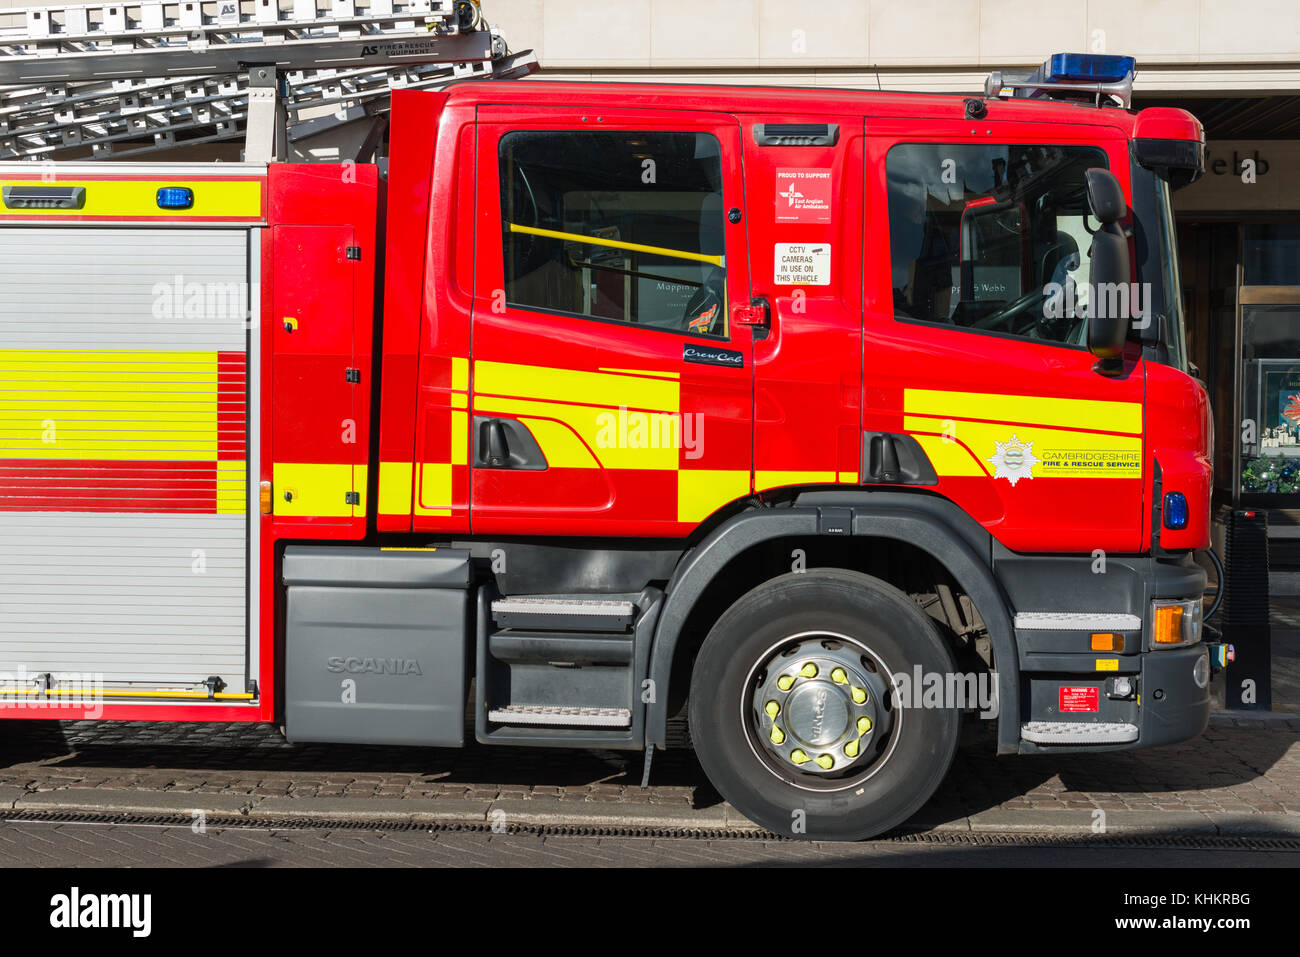 A fire engine from Cambridgeshire Fire and Rescue Service in the centre of Cambridge city. England, UK. Stock Photo